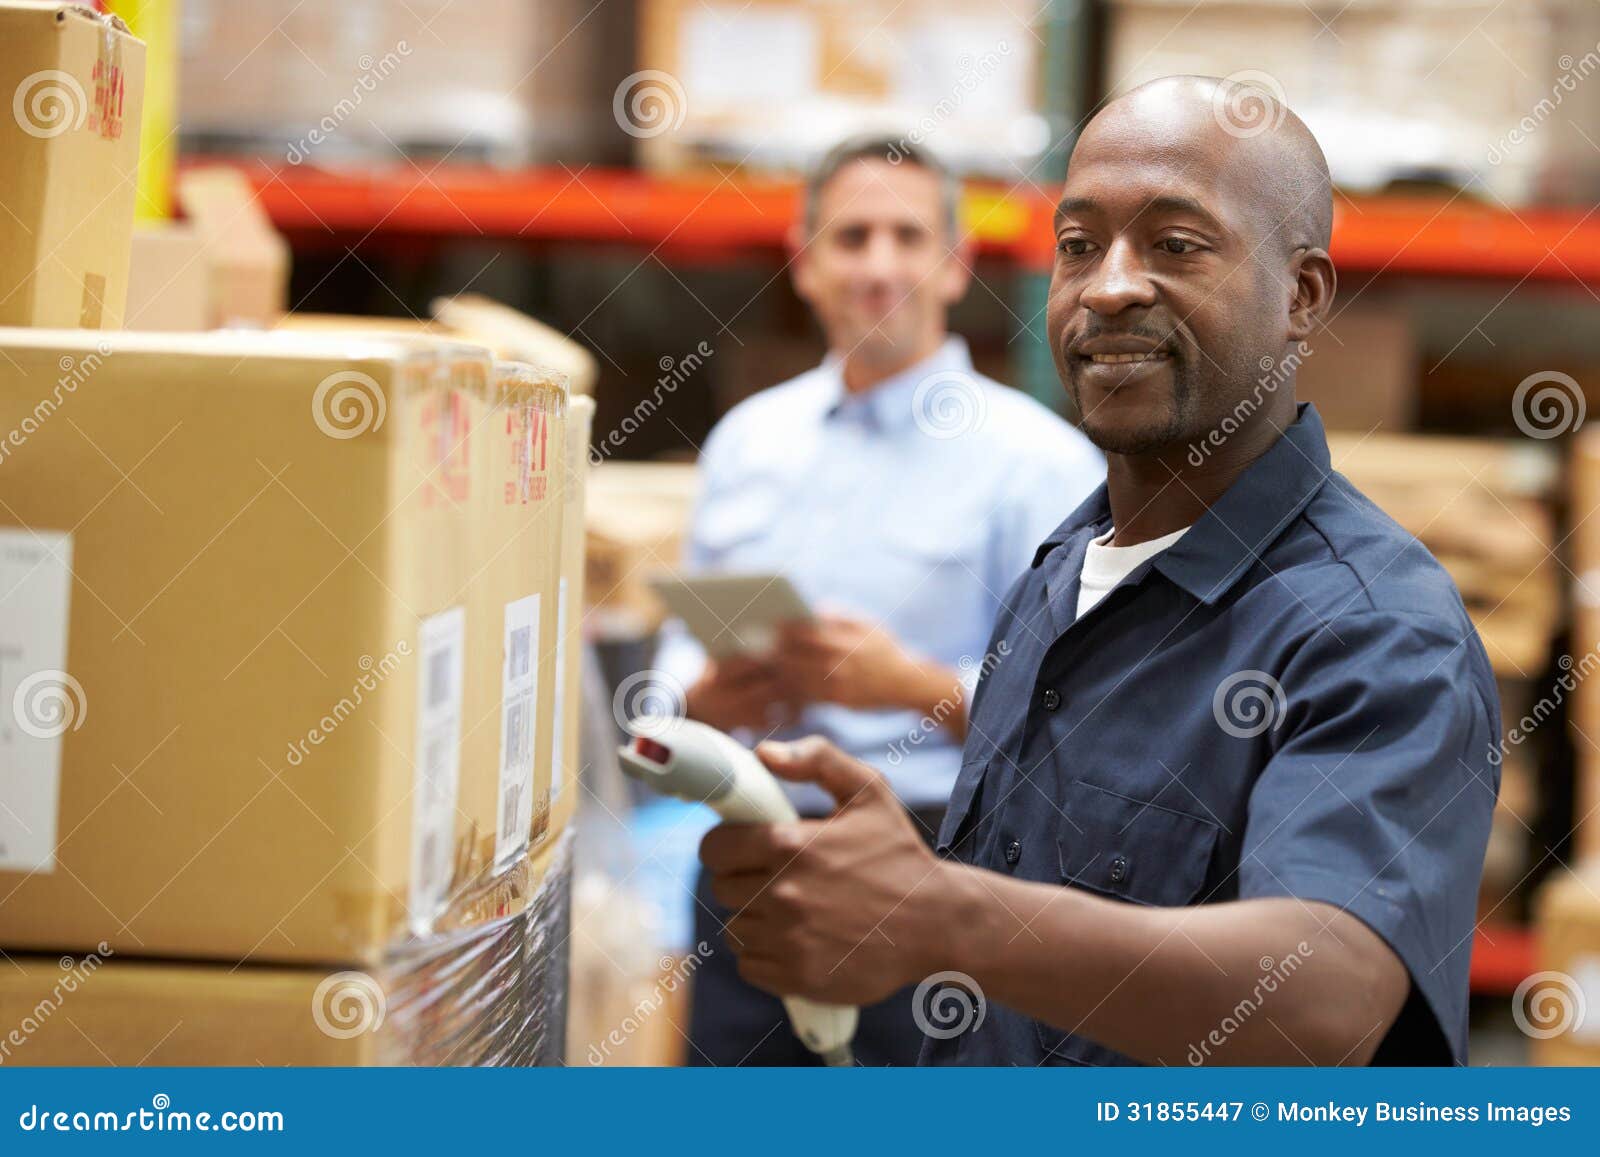 manager in warehouse with worker scanning box in foreground